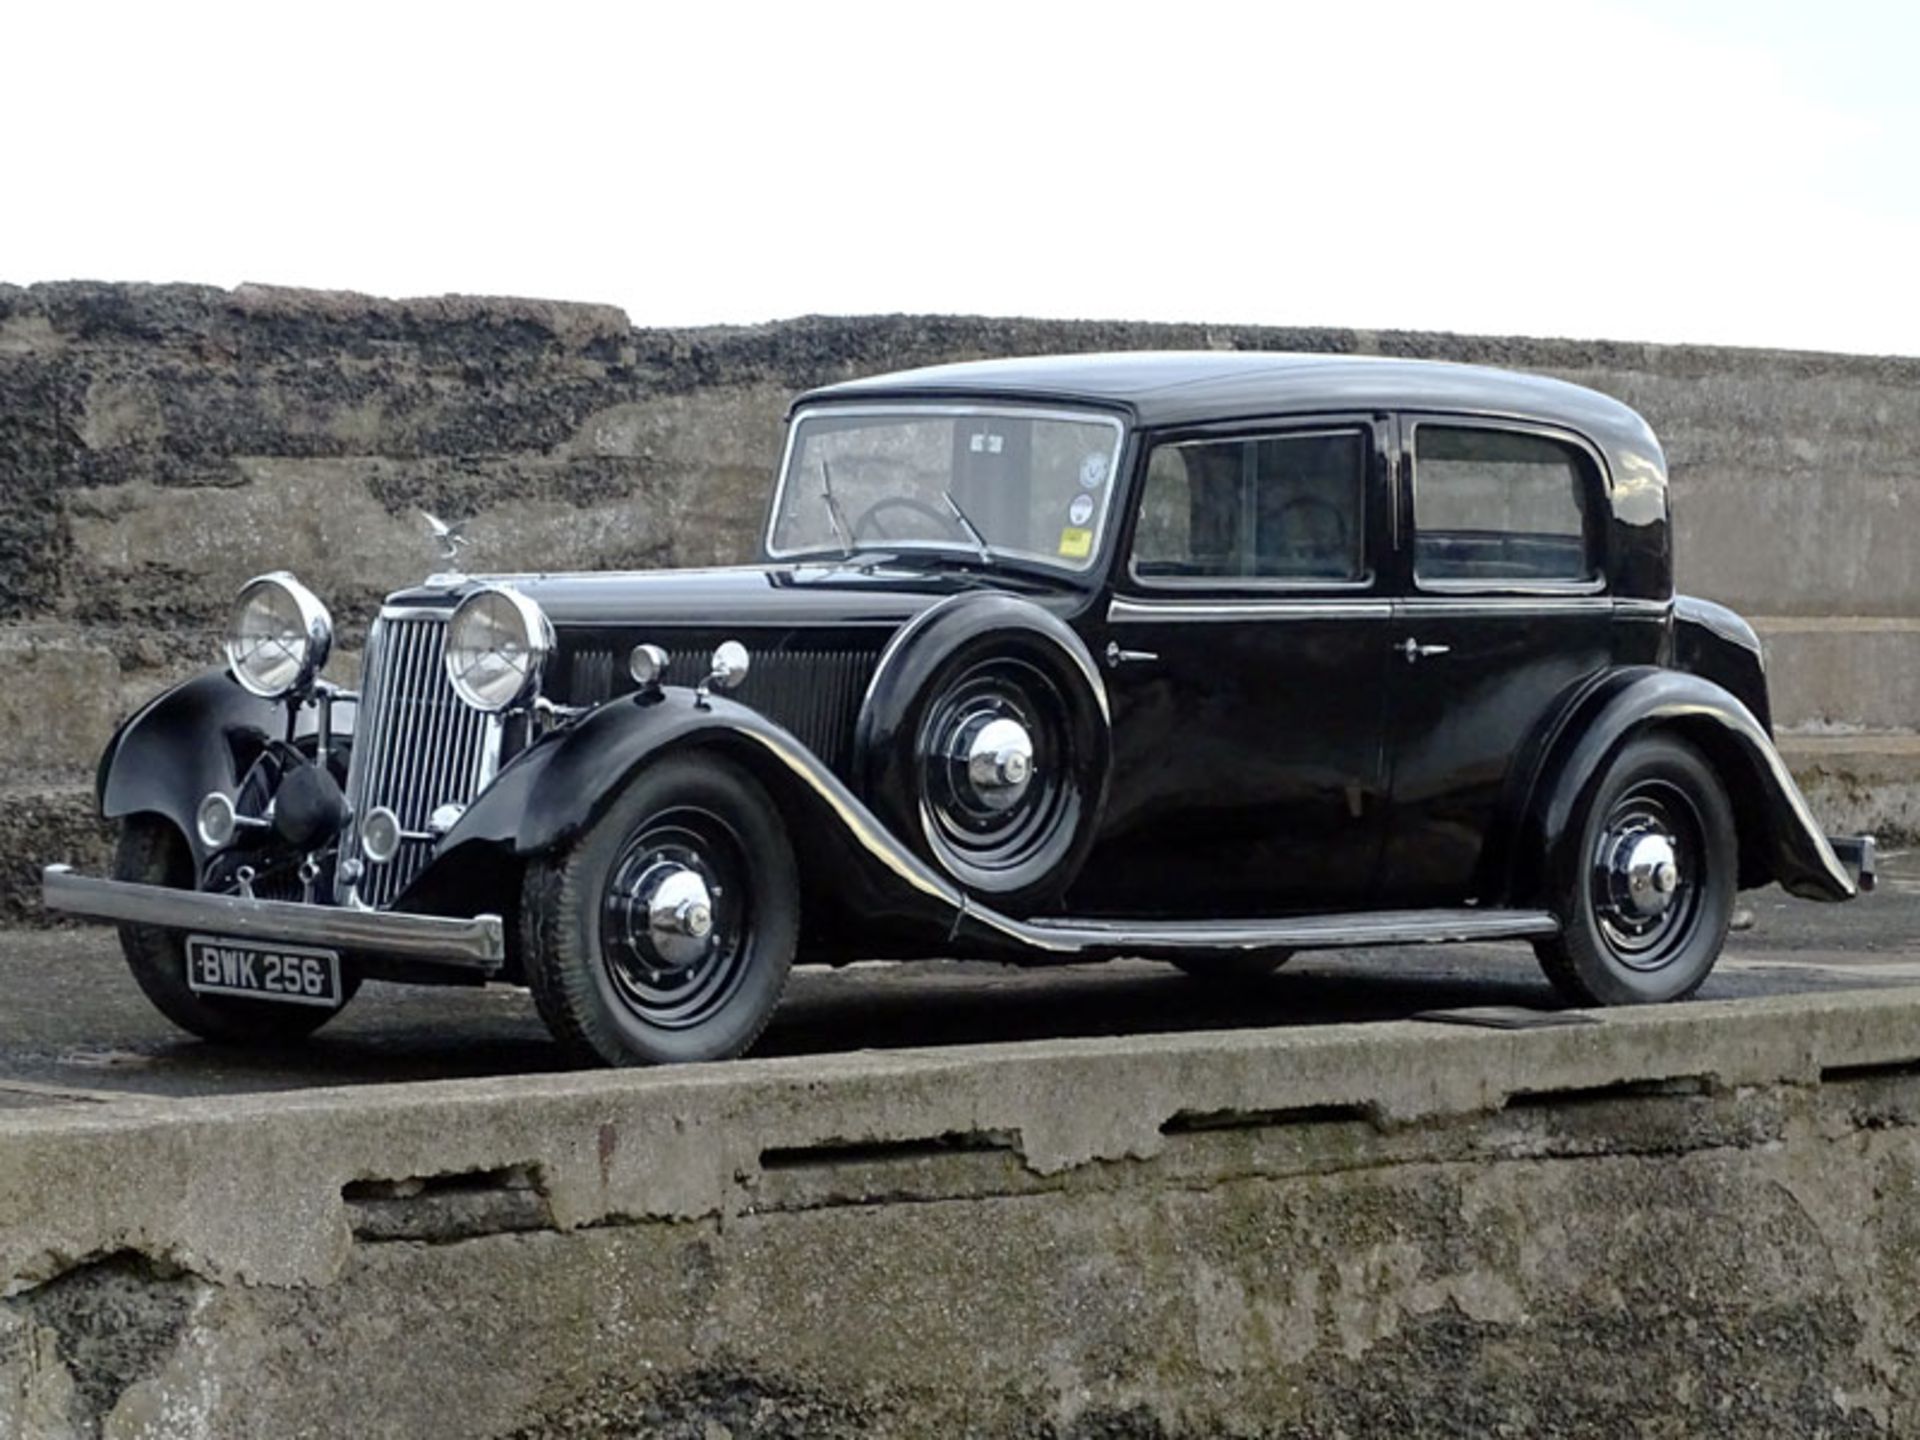 1935 Armstrong Siddeley Special MK II Touring Limousine - Image 3 of 15